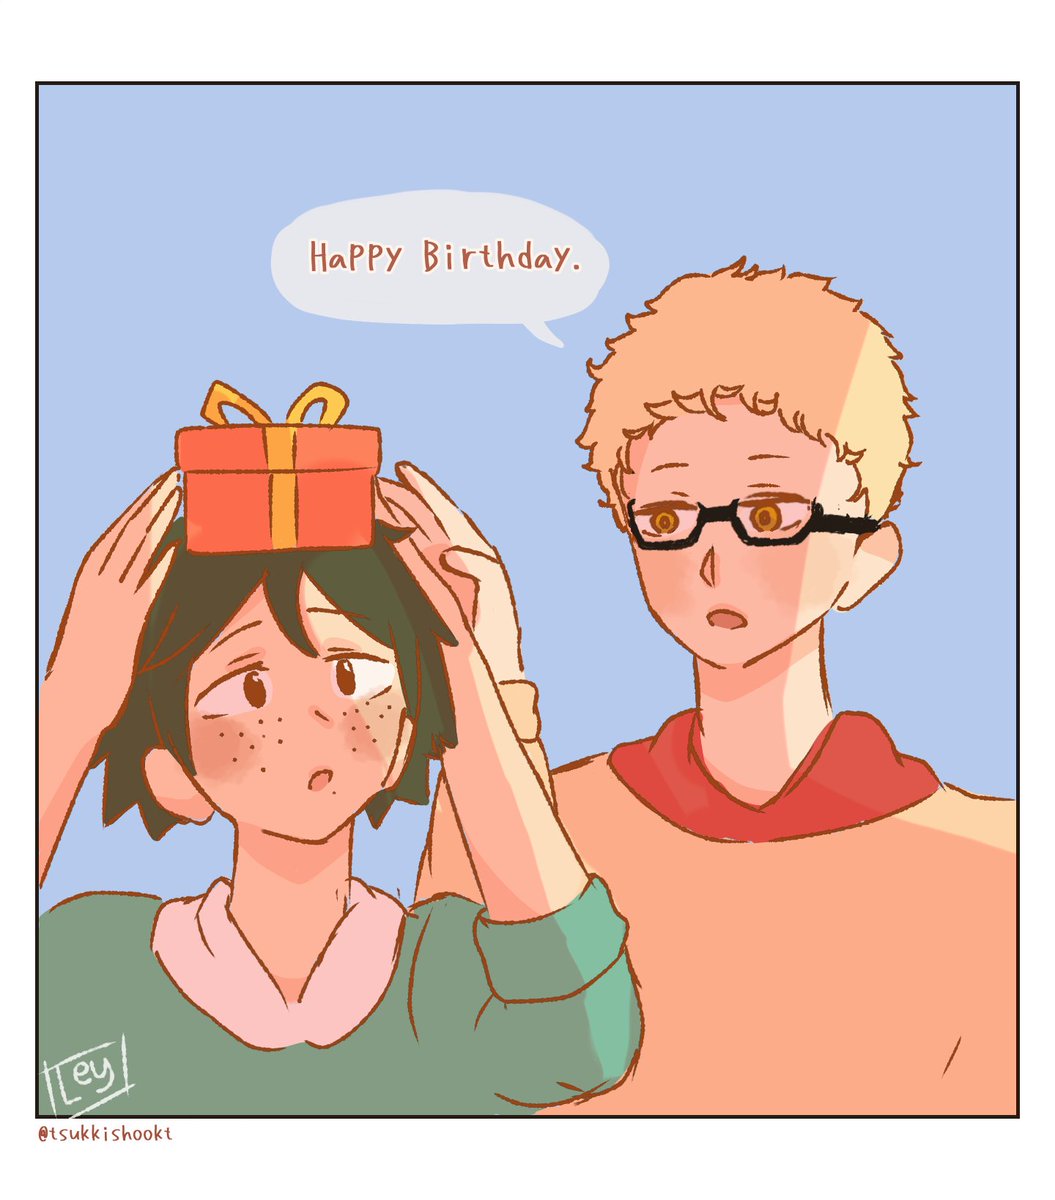 HAPPY BIRTHDAY YAMAGUCHI !!
Wishing the best and for your happiness, u deserve everything that'll put a big bright smile on your face

// how could i forget - tsukki // 